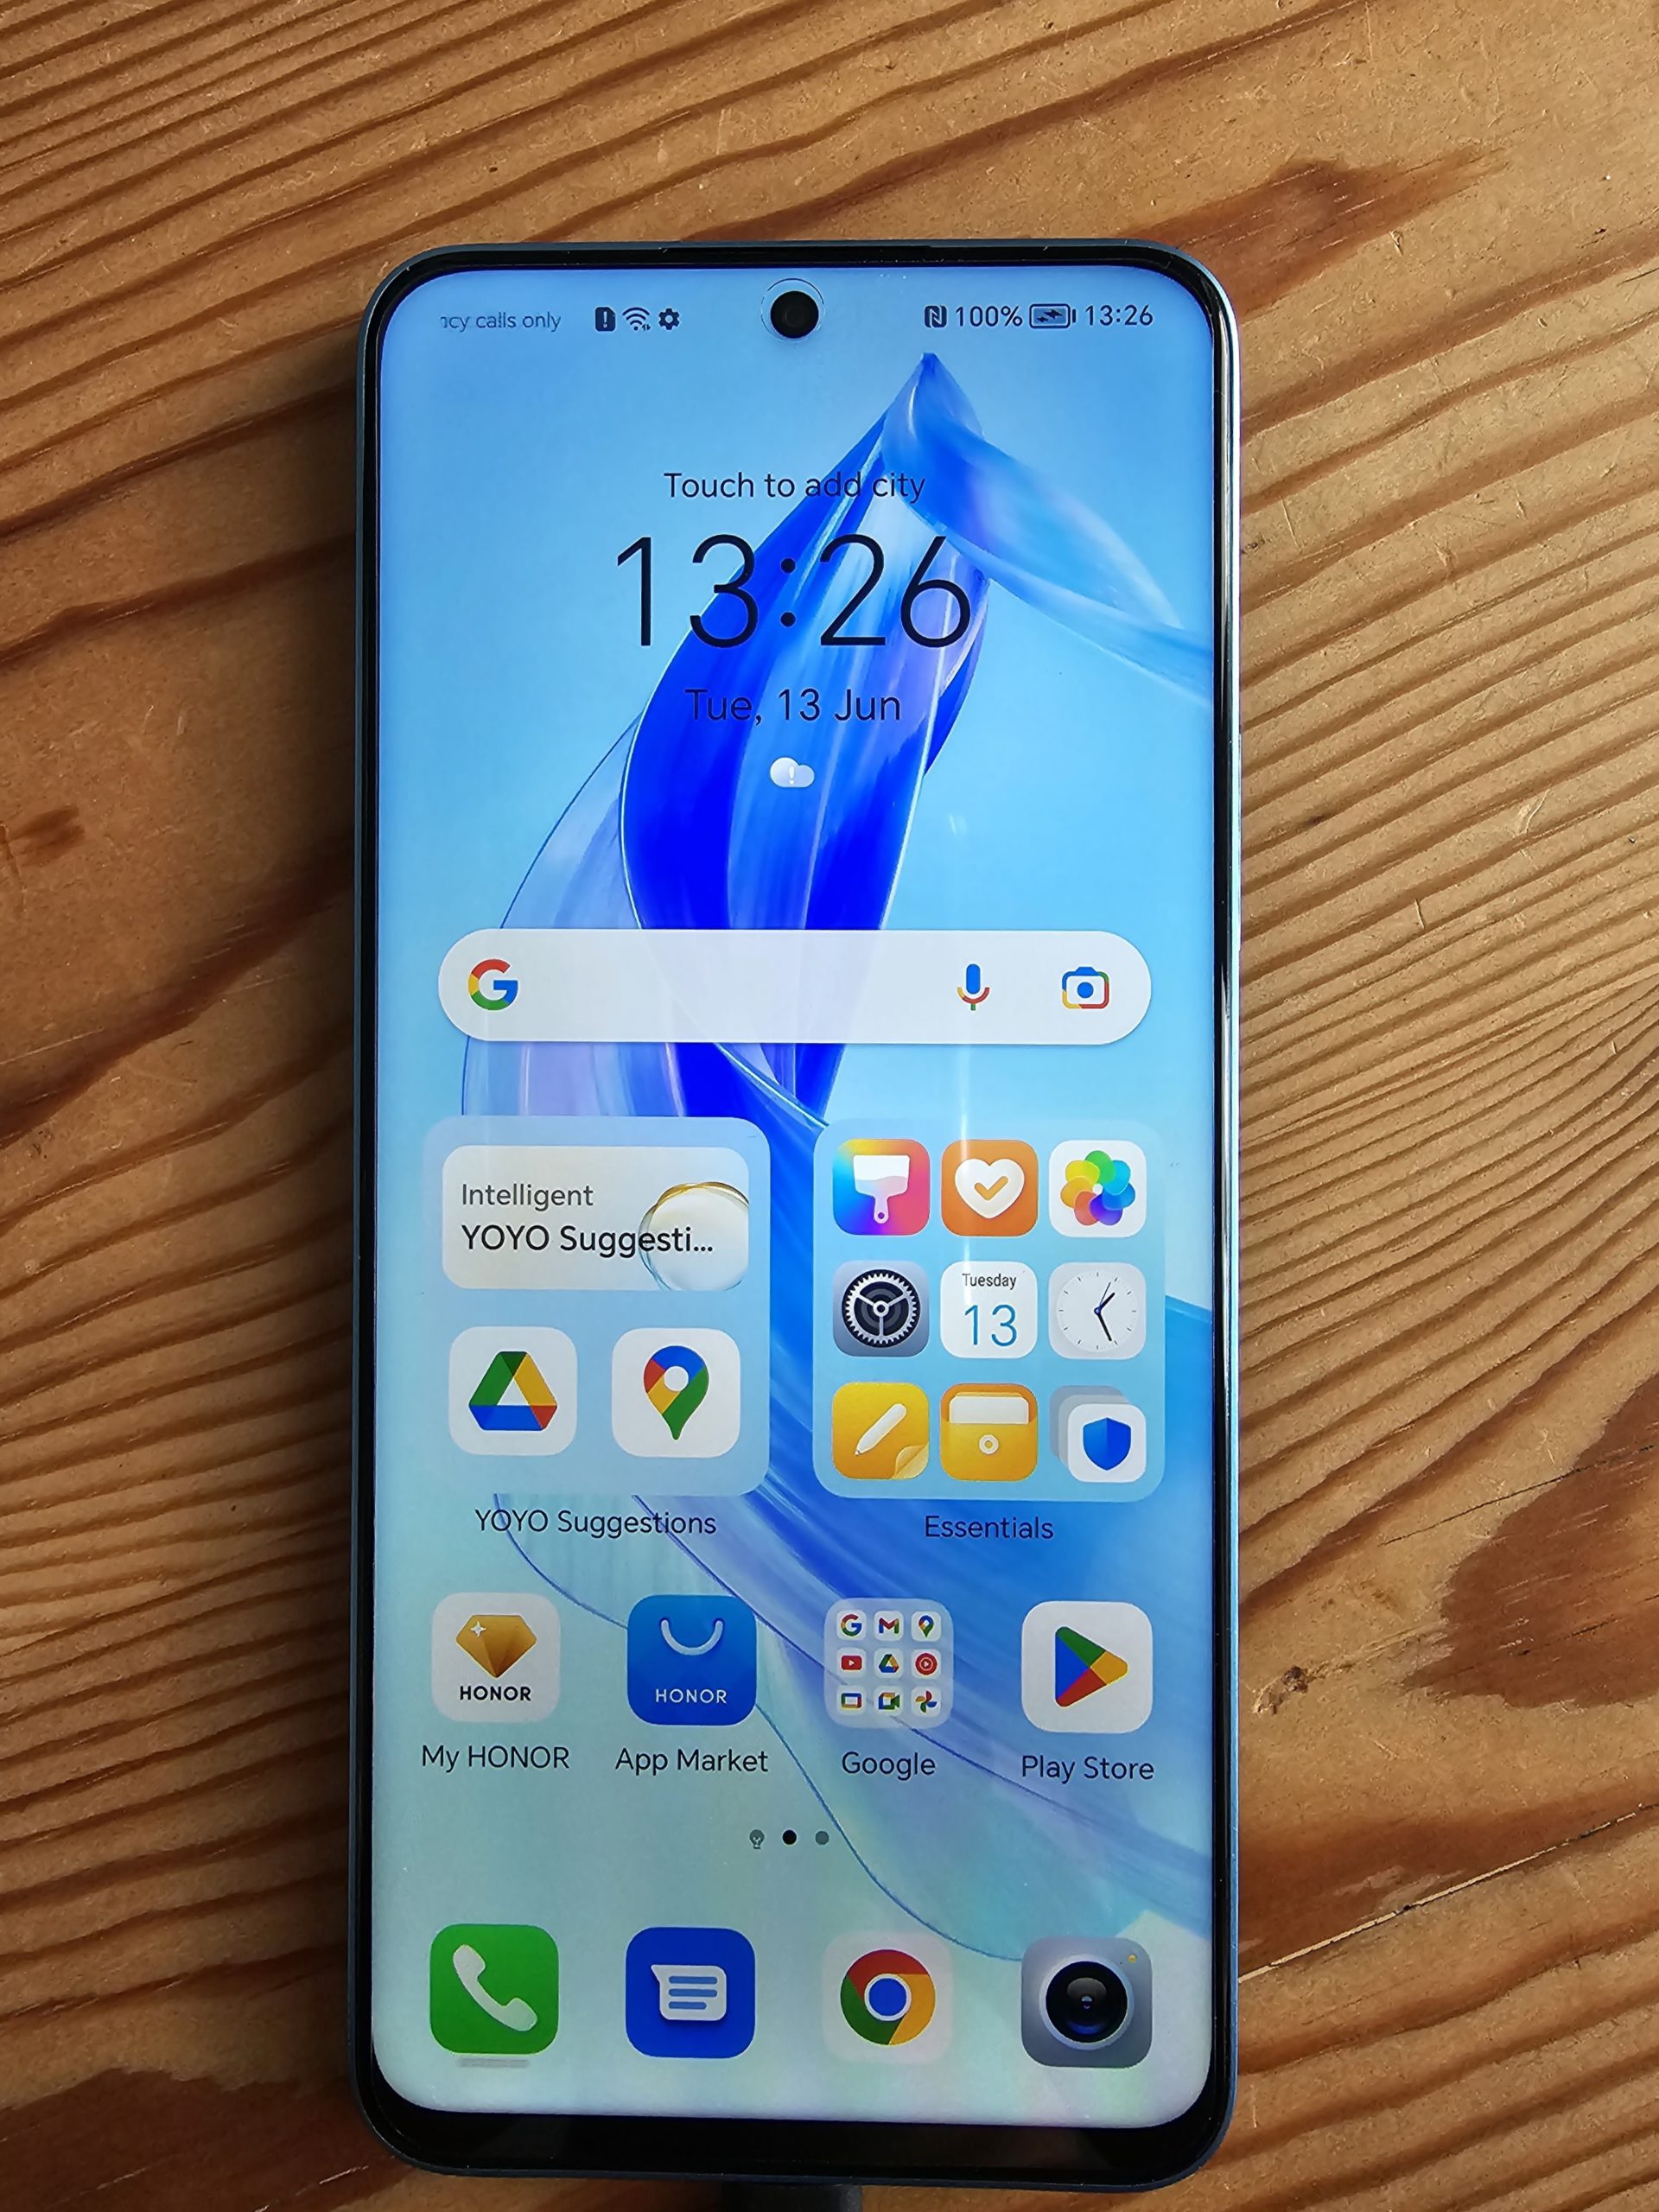 HONOR 90 Lite 5G review: Lite, but only in name